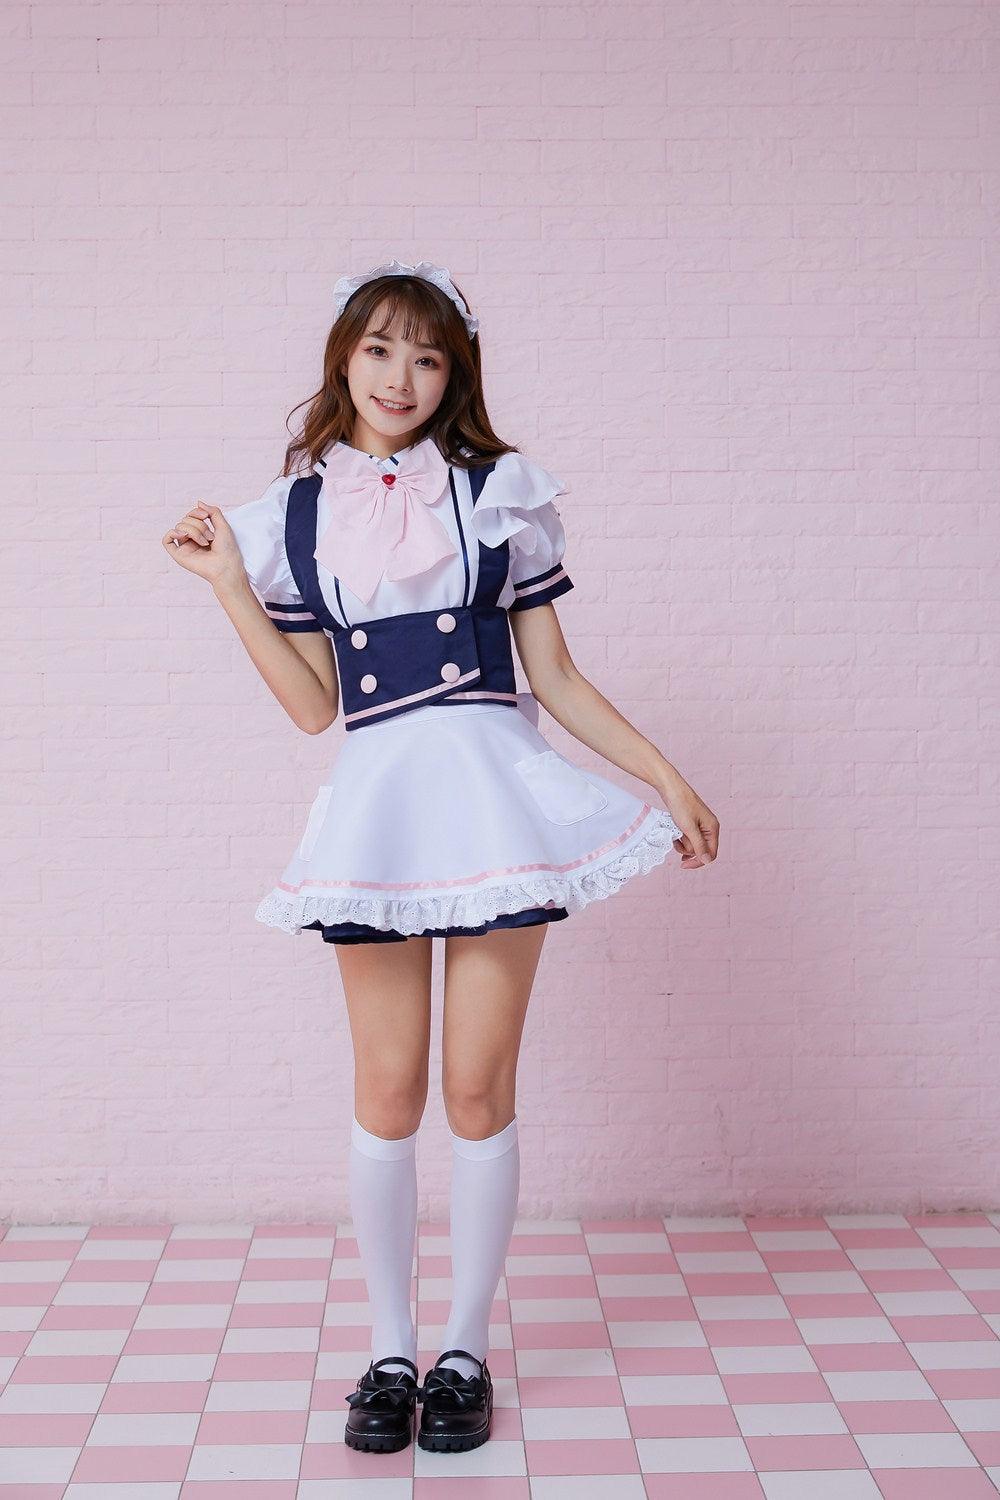 Miku Anime Cosplay Costume French Maid Outfit Dress Sissy Japanese Lolita Fancy Dress - coscrew